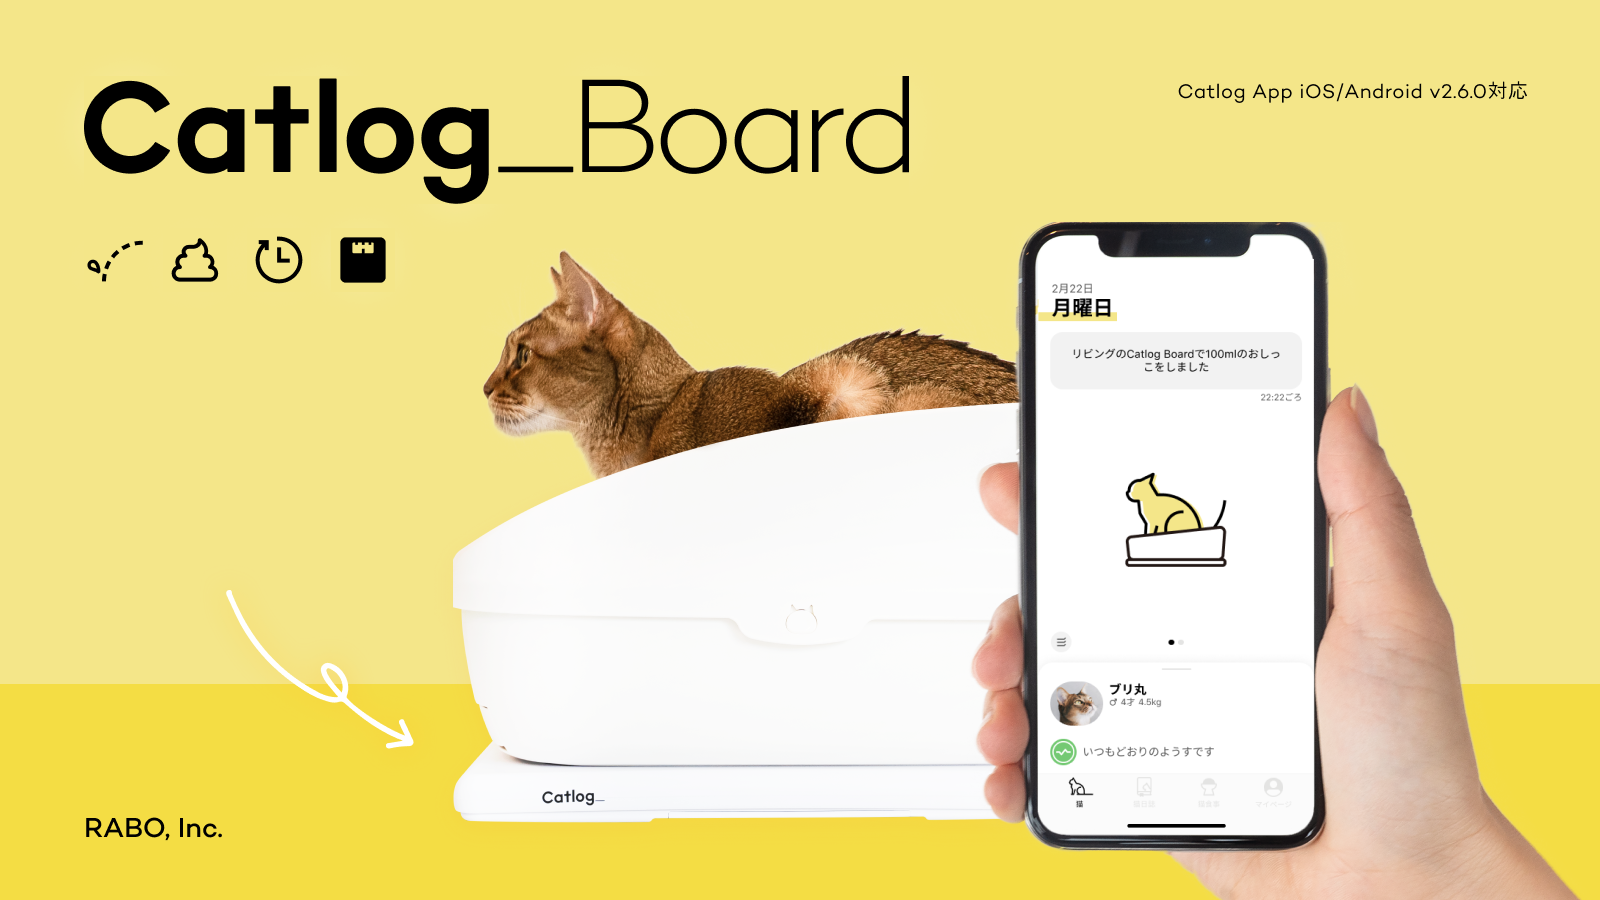 catlog board キャットログ ボード 1台 - トイレ用品